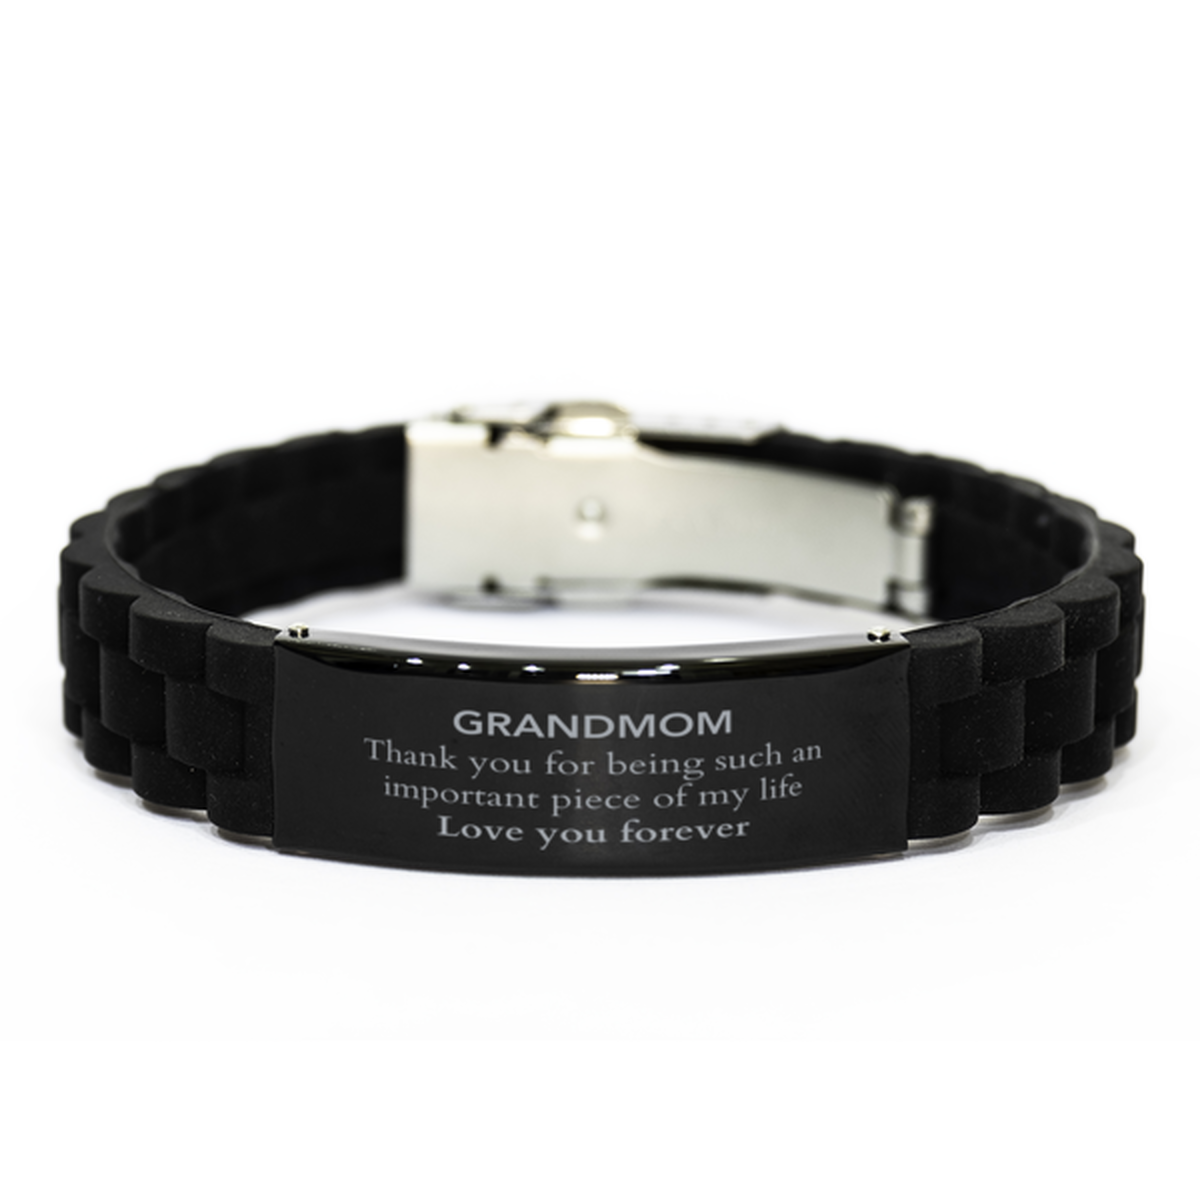 Appropriate Grandmom Black Glidelock Clasp Bracelet Epic Birthday Gifts for Grandmom Thank you for being such an important piece of my life Grandmom Christmas Mothers Fathers Day